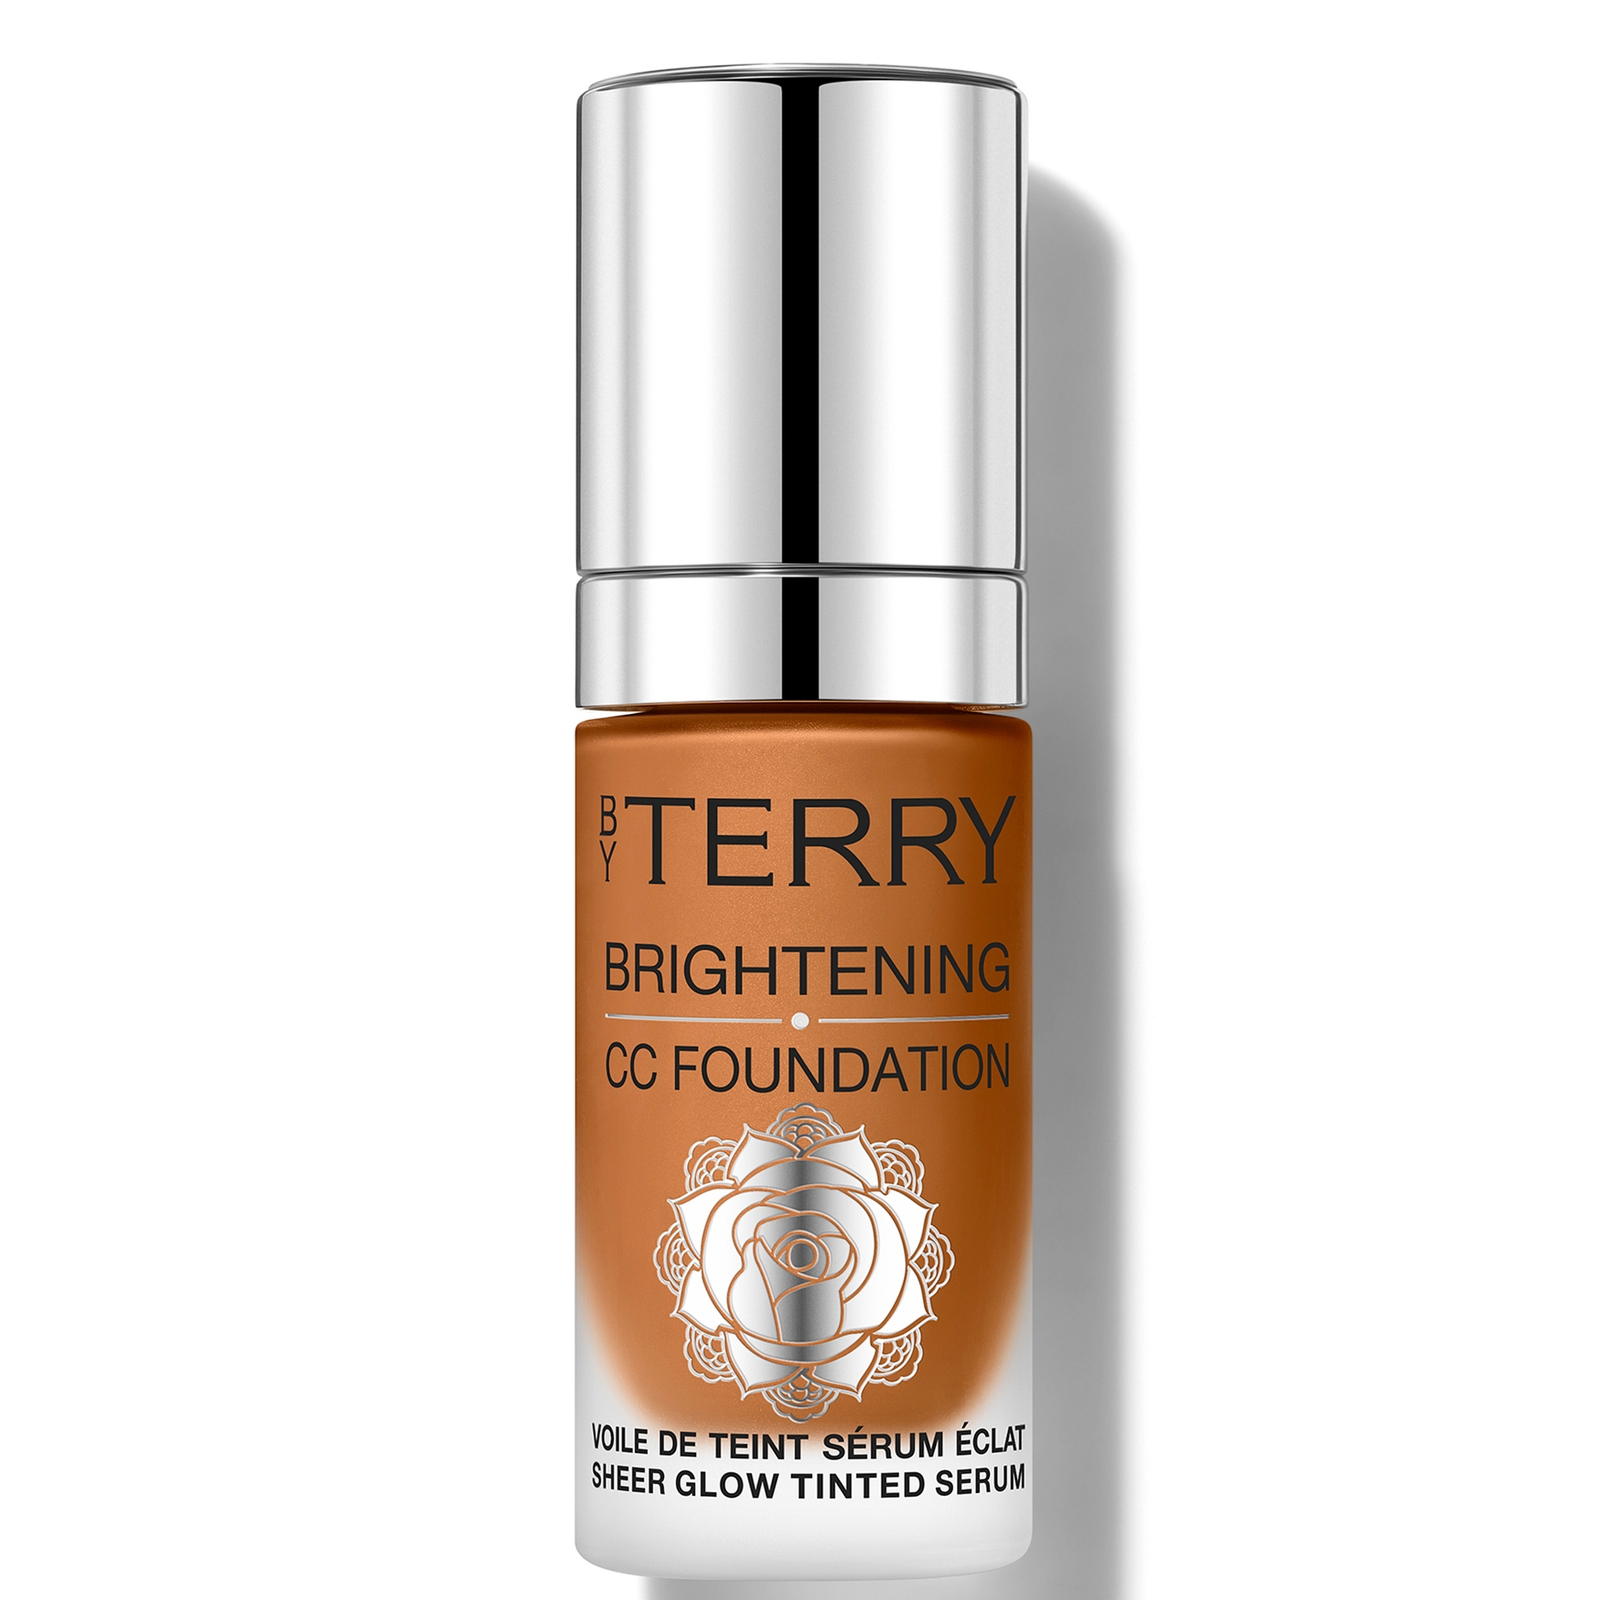 By Terry Brightening Cc Foundation 30ml (various Shades) - 7w In White